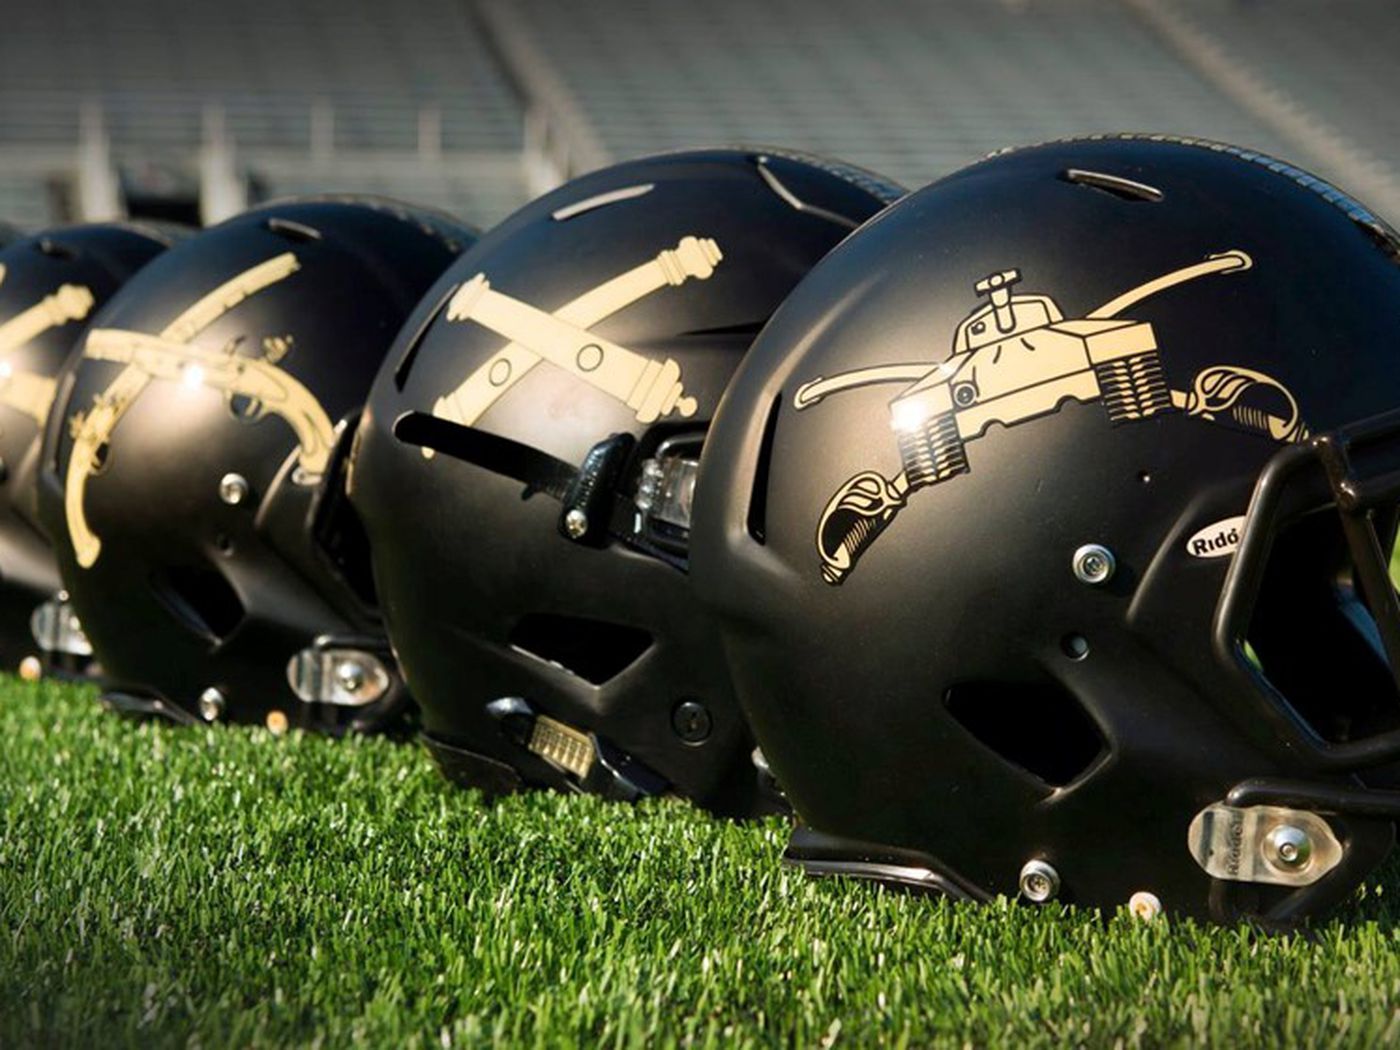 Army's awesome helmets for the Navy game, with different military insignia for each position